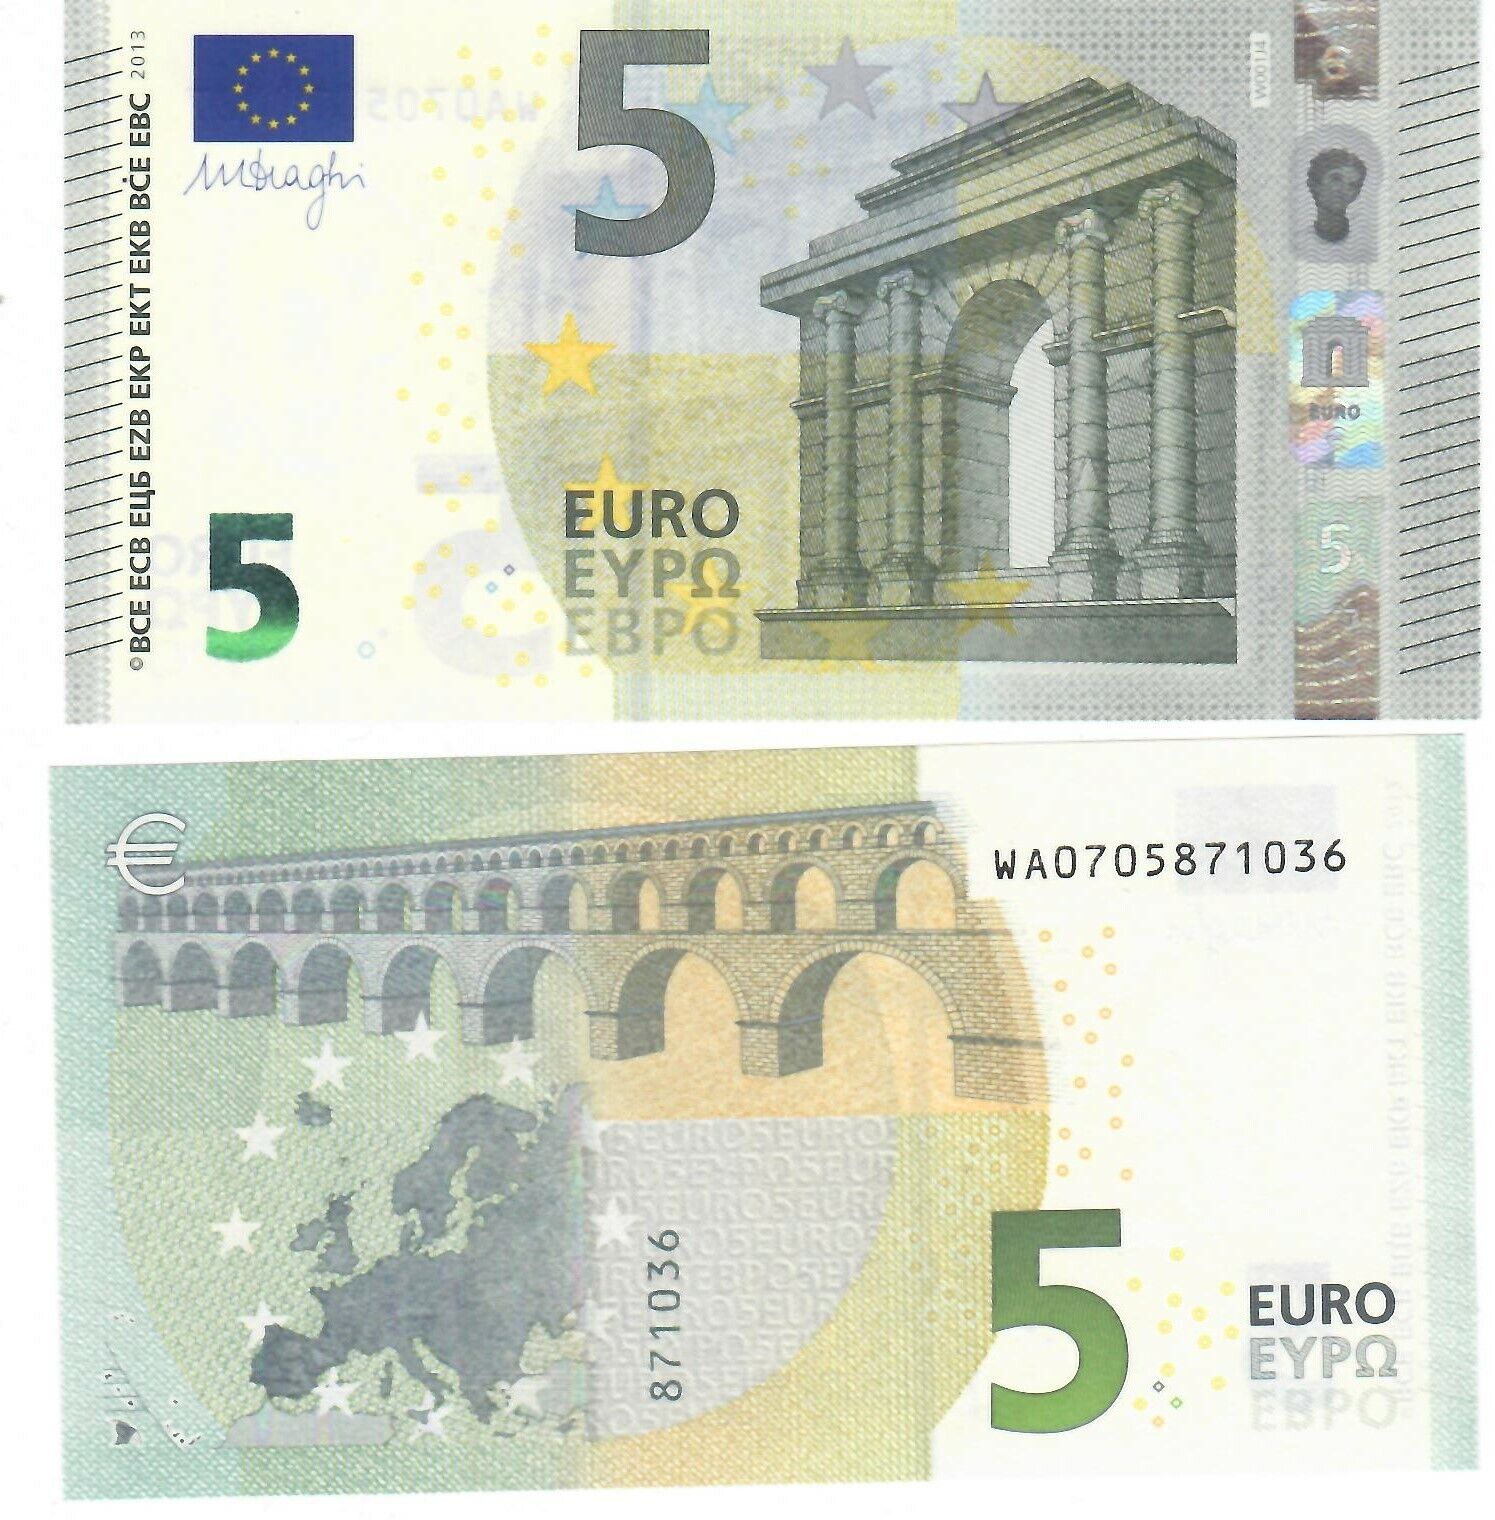 5, EUR to USD | Convert Euros to US Dollars Exchange Rate in the USA